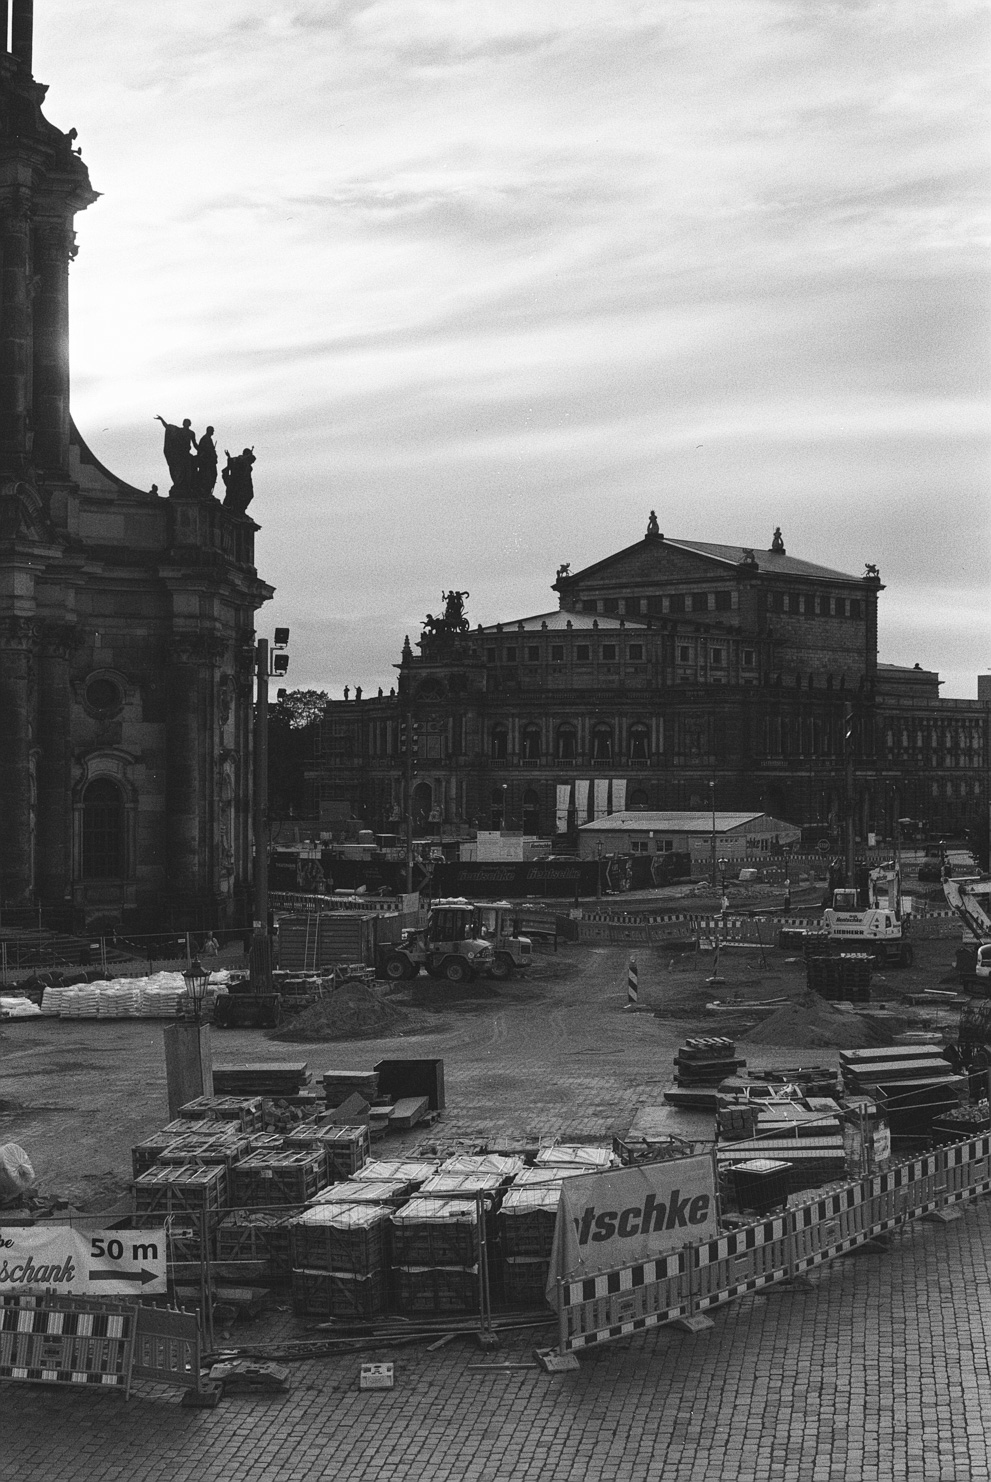 The theatre plaza in Dresden with the Semper Opera, the plaza is a large construction site. Shot on Fomapan 200 creative.